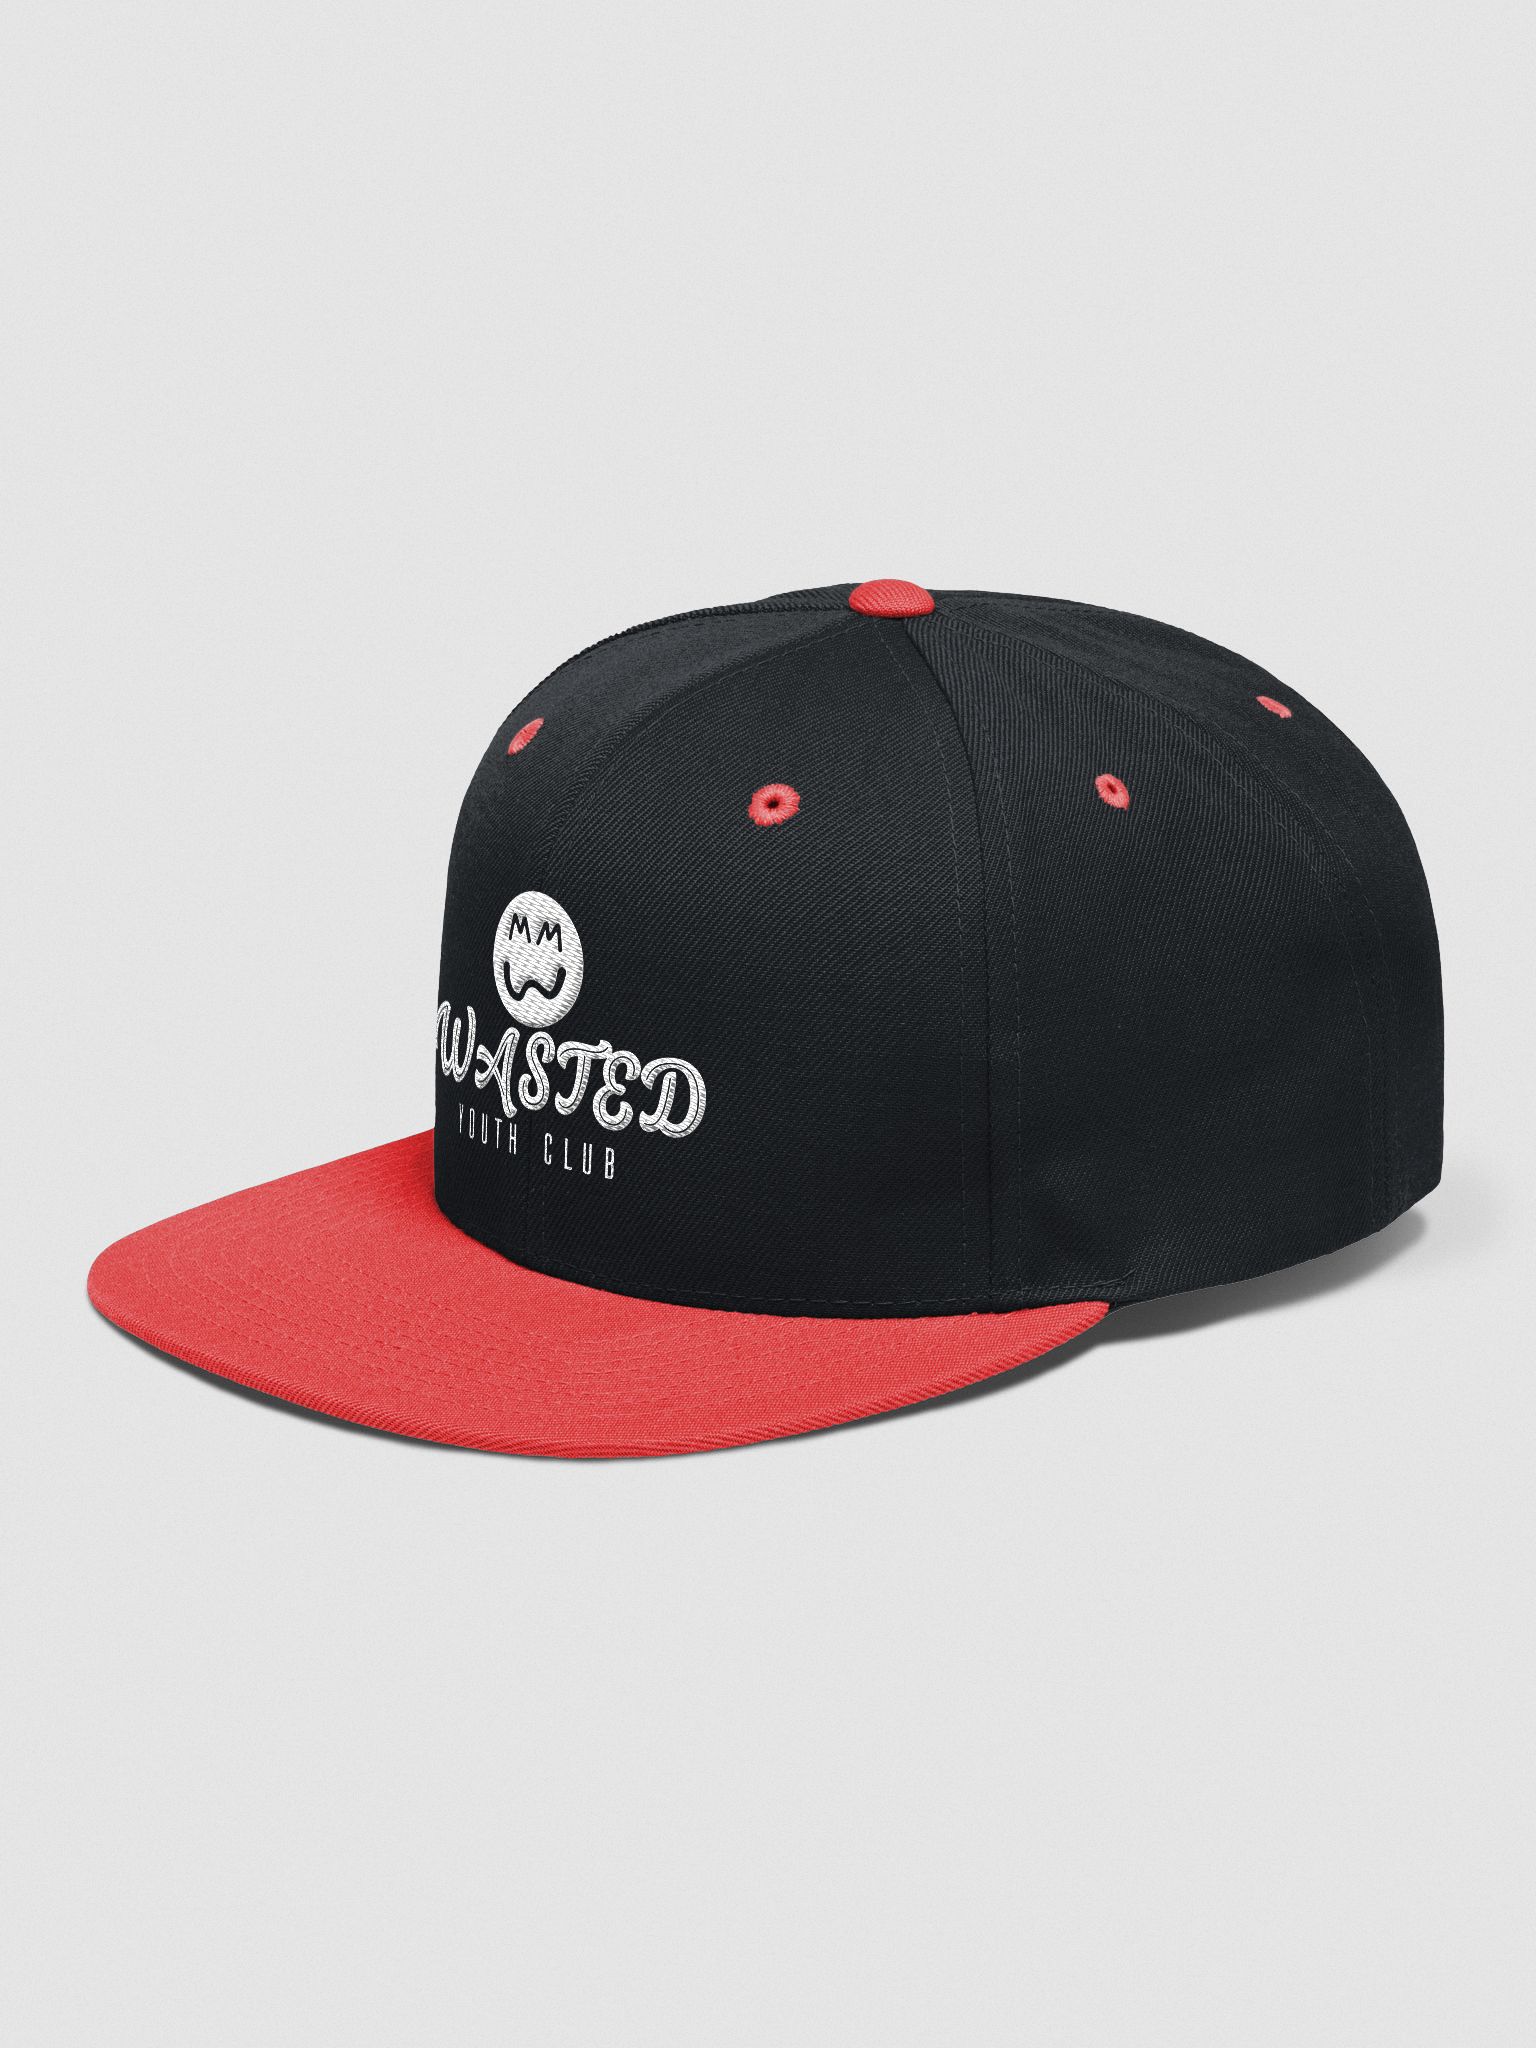 Wasted Youth Club Snapback | Wasted Youth Club